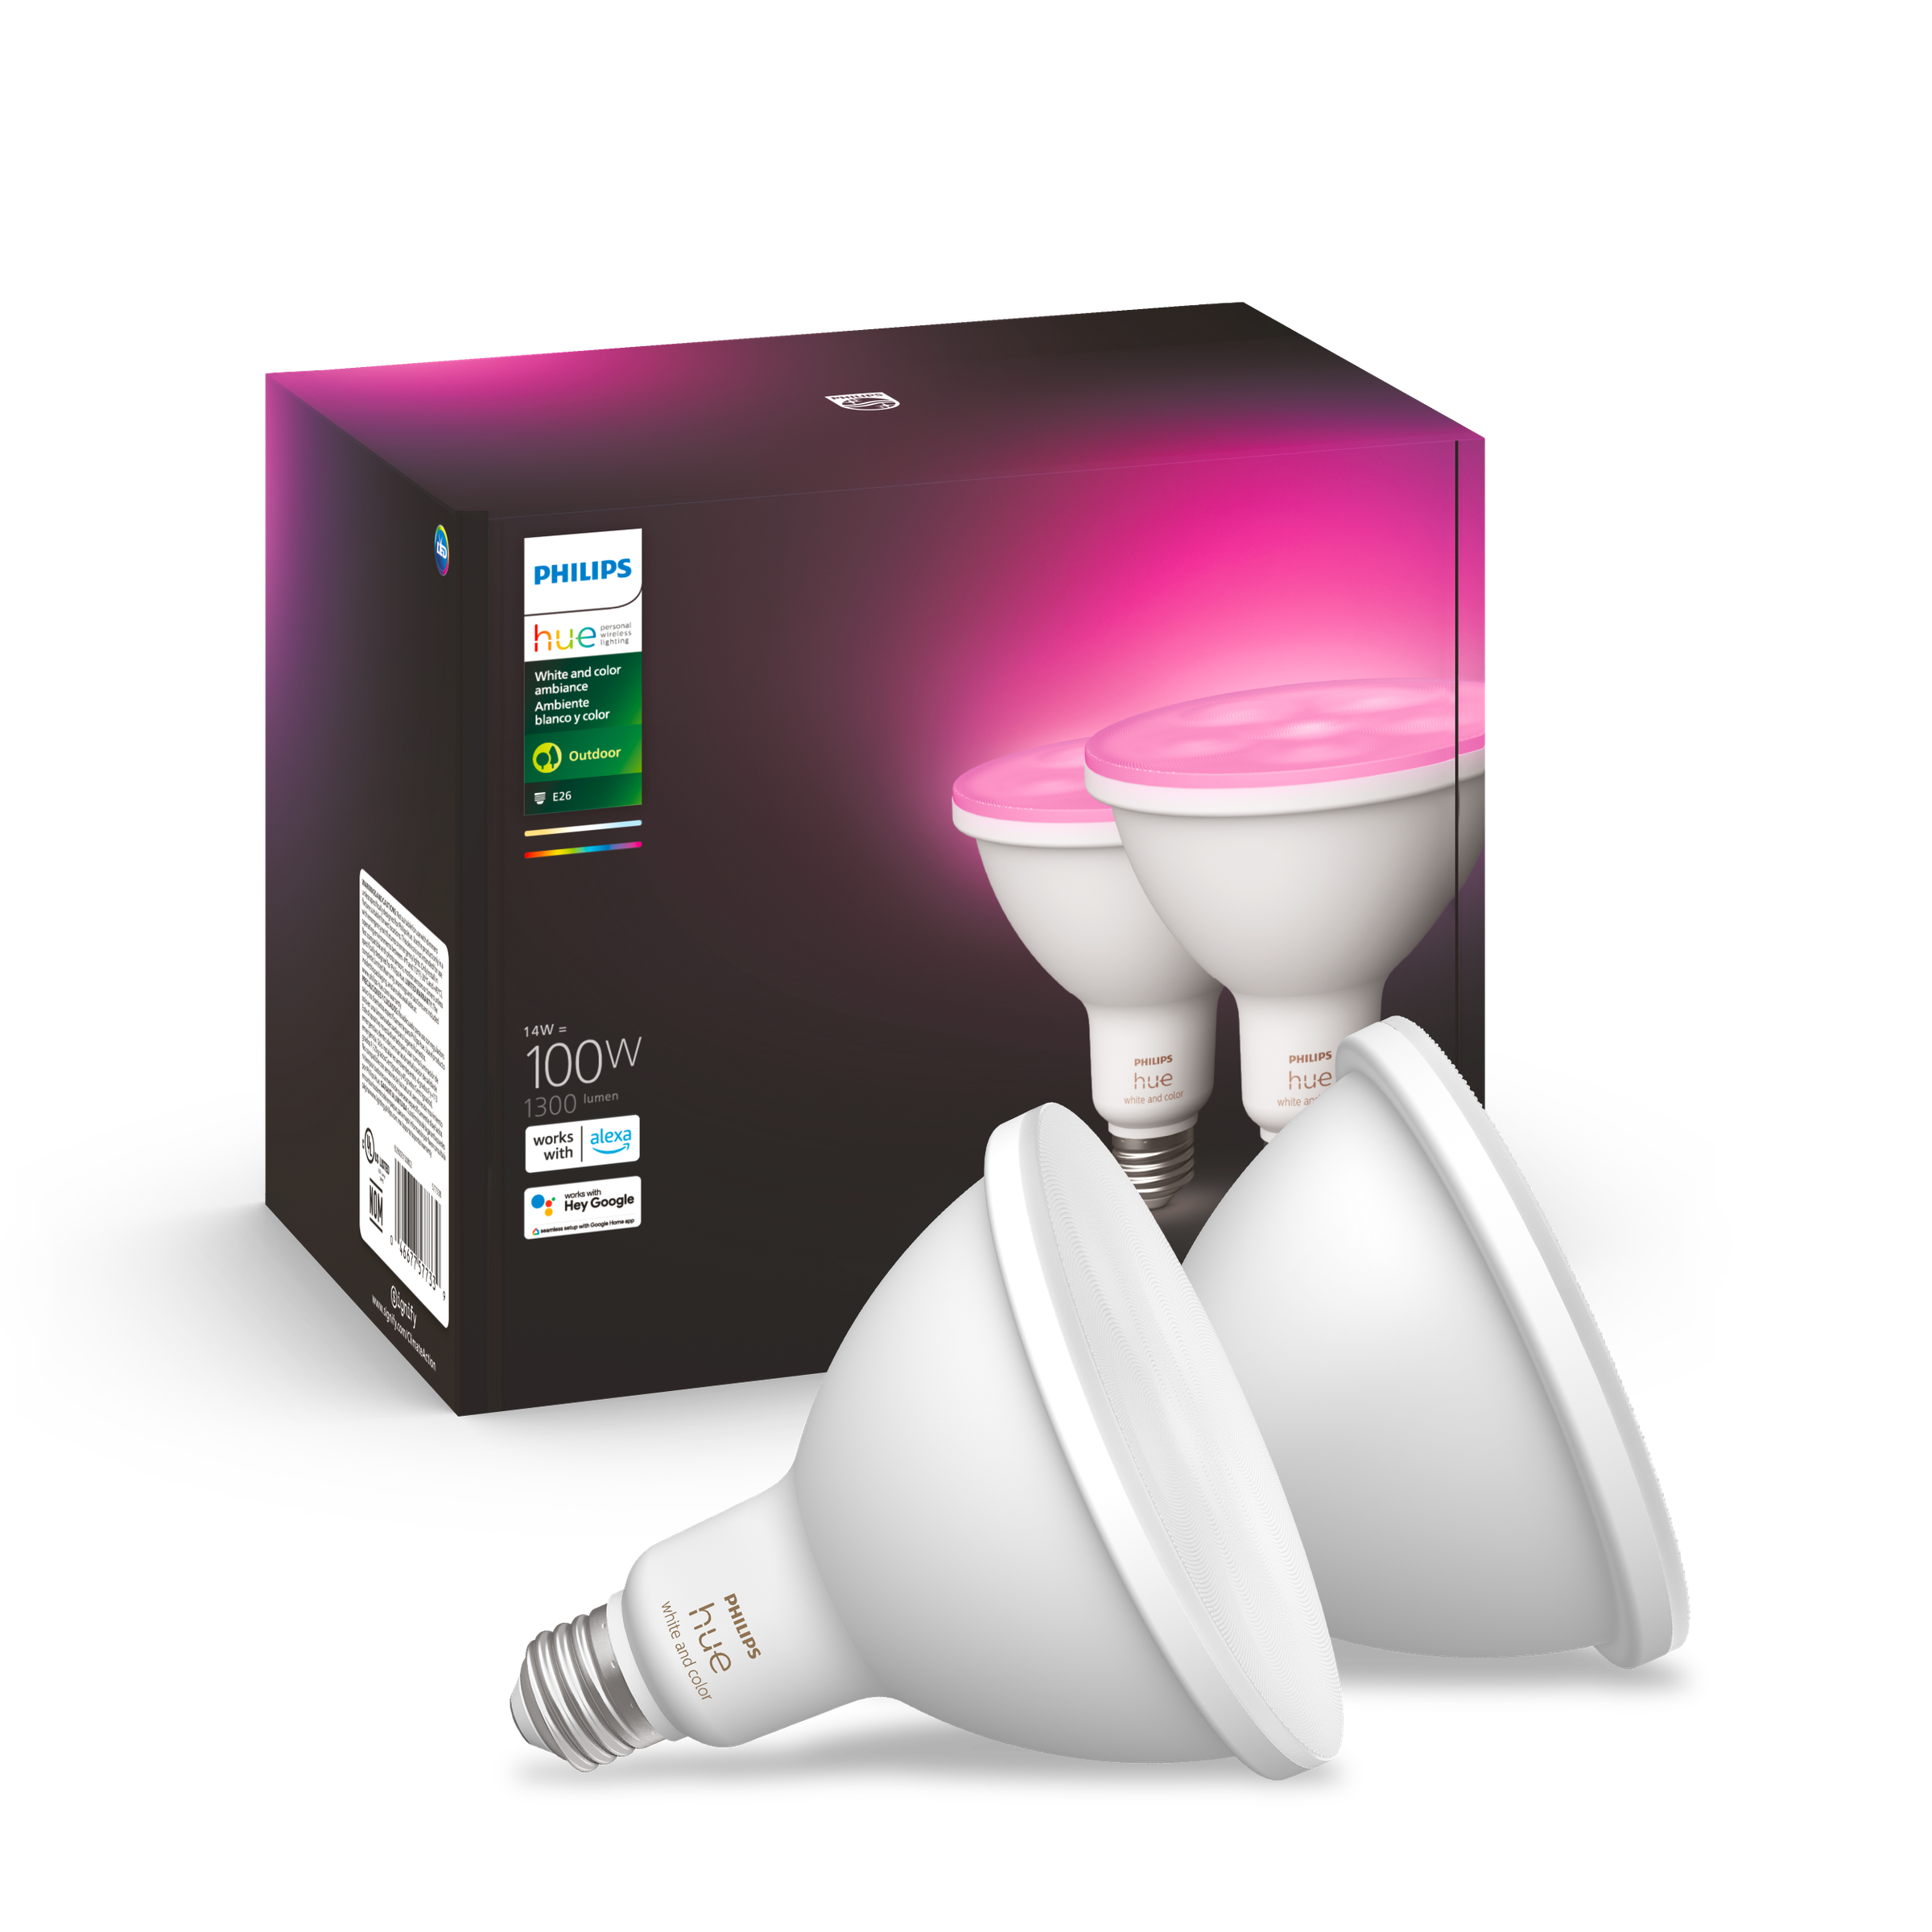 Signify also has new Philips Hue floodlight bulbs.